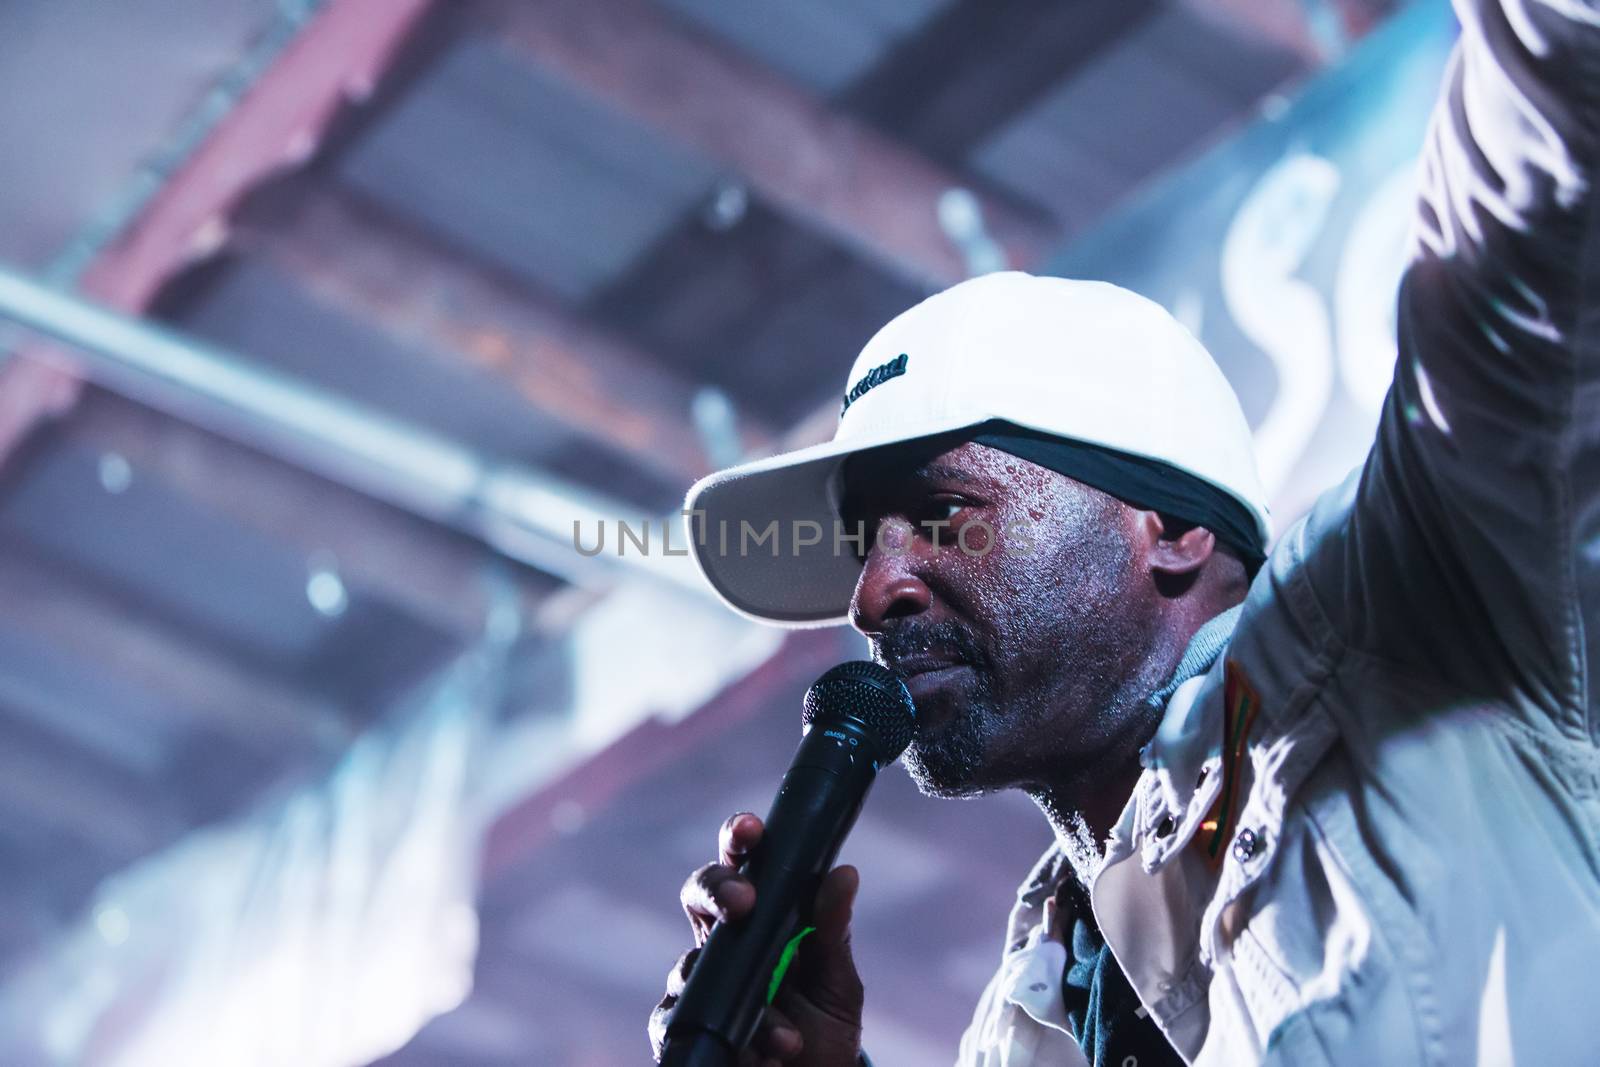 HOT SPRINGS, NC - JULY 9: Close up on Reggae musician Pato Banton performing on stage at the Wild Goose Festival on July 9, 2016 in Hot Springs, NC, USA.